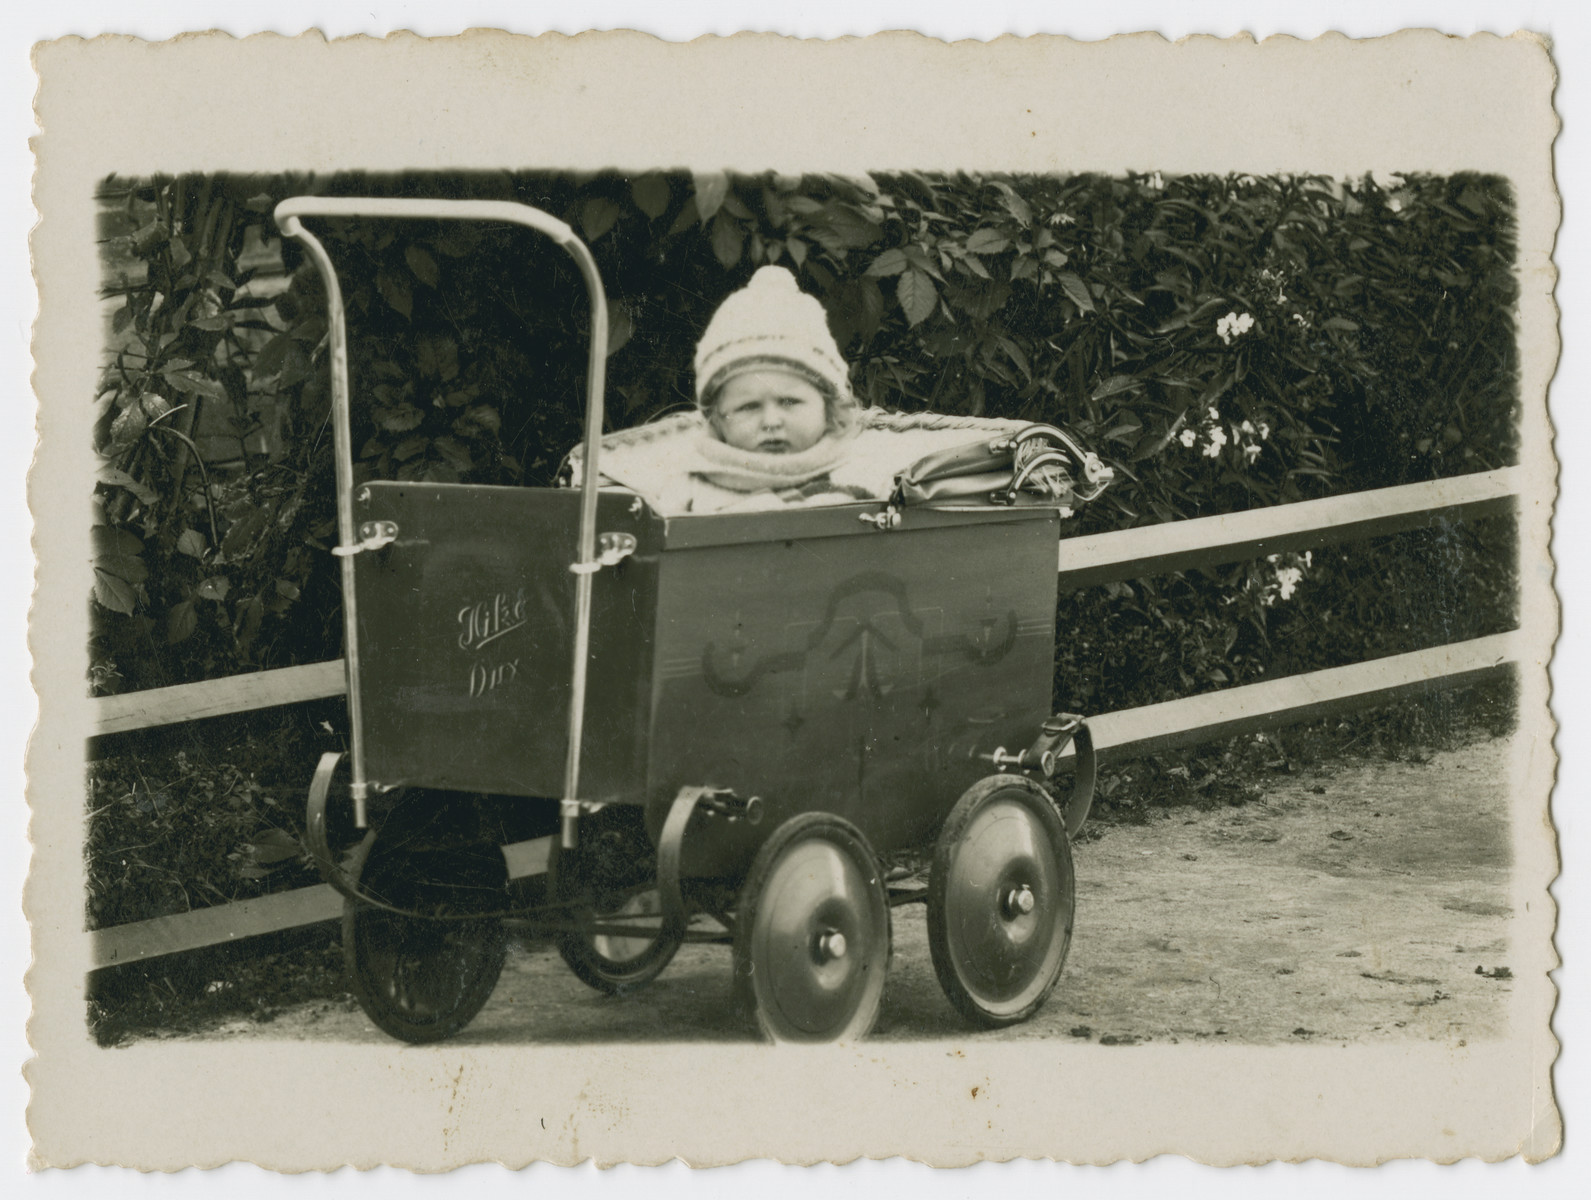 Close-up picture of a young child in a baby carriage in prewar Butrimonys.

Part of a collection of photographs depicting Jews from Butrimonys where some 750 Jews were rounded up and murdered by the Einsatzgruppen and Lithuanian collaborators after the invasion of the USSR.